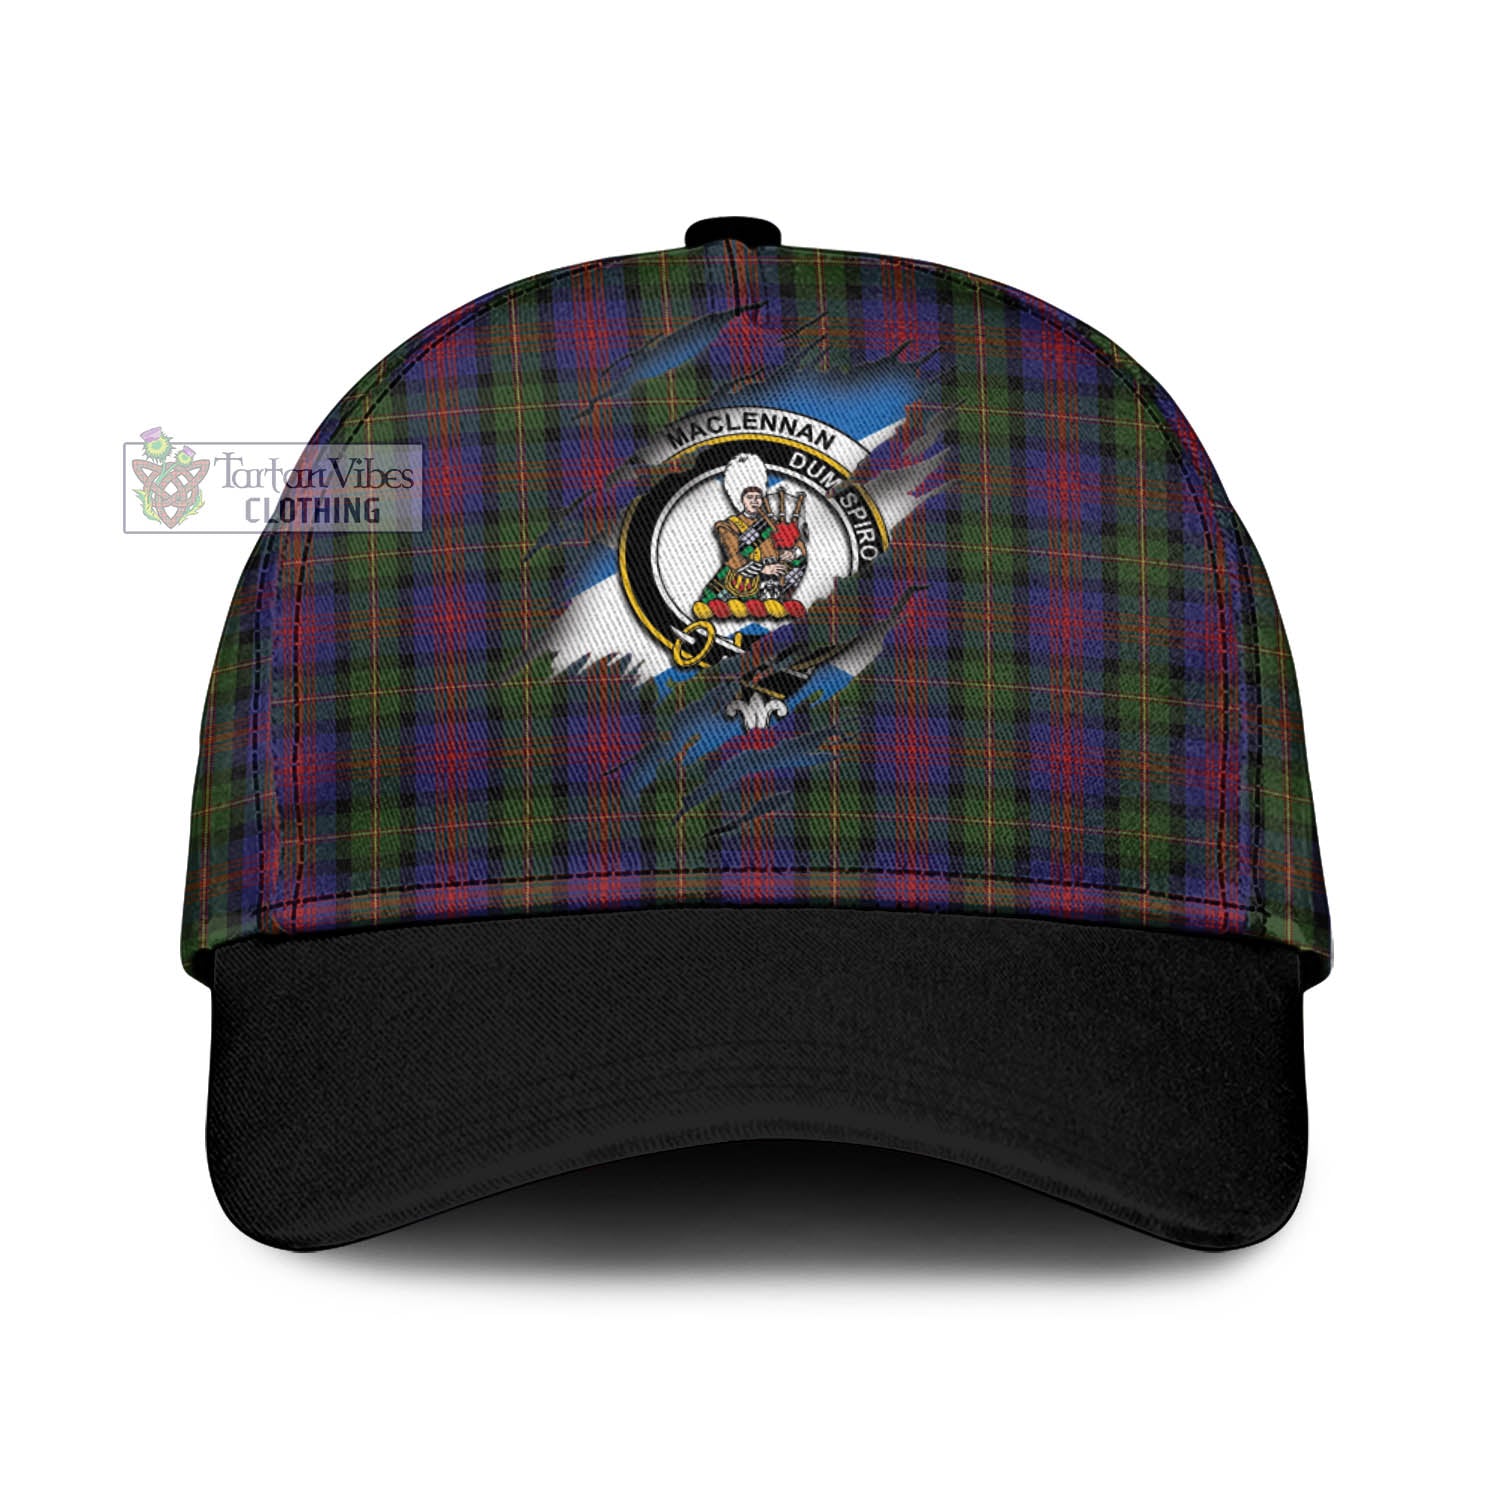 Tartan Vibes Clothing MacLennan Tartan Classic Cap with Family Crest In Me Style